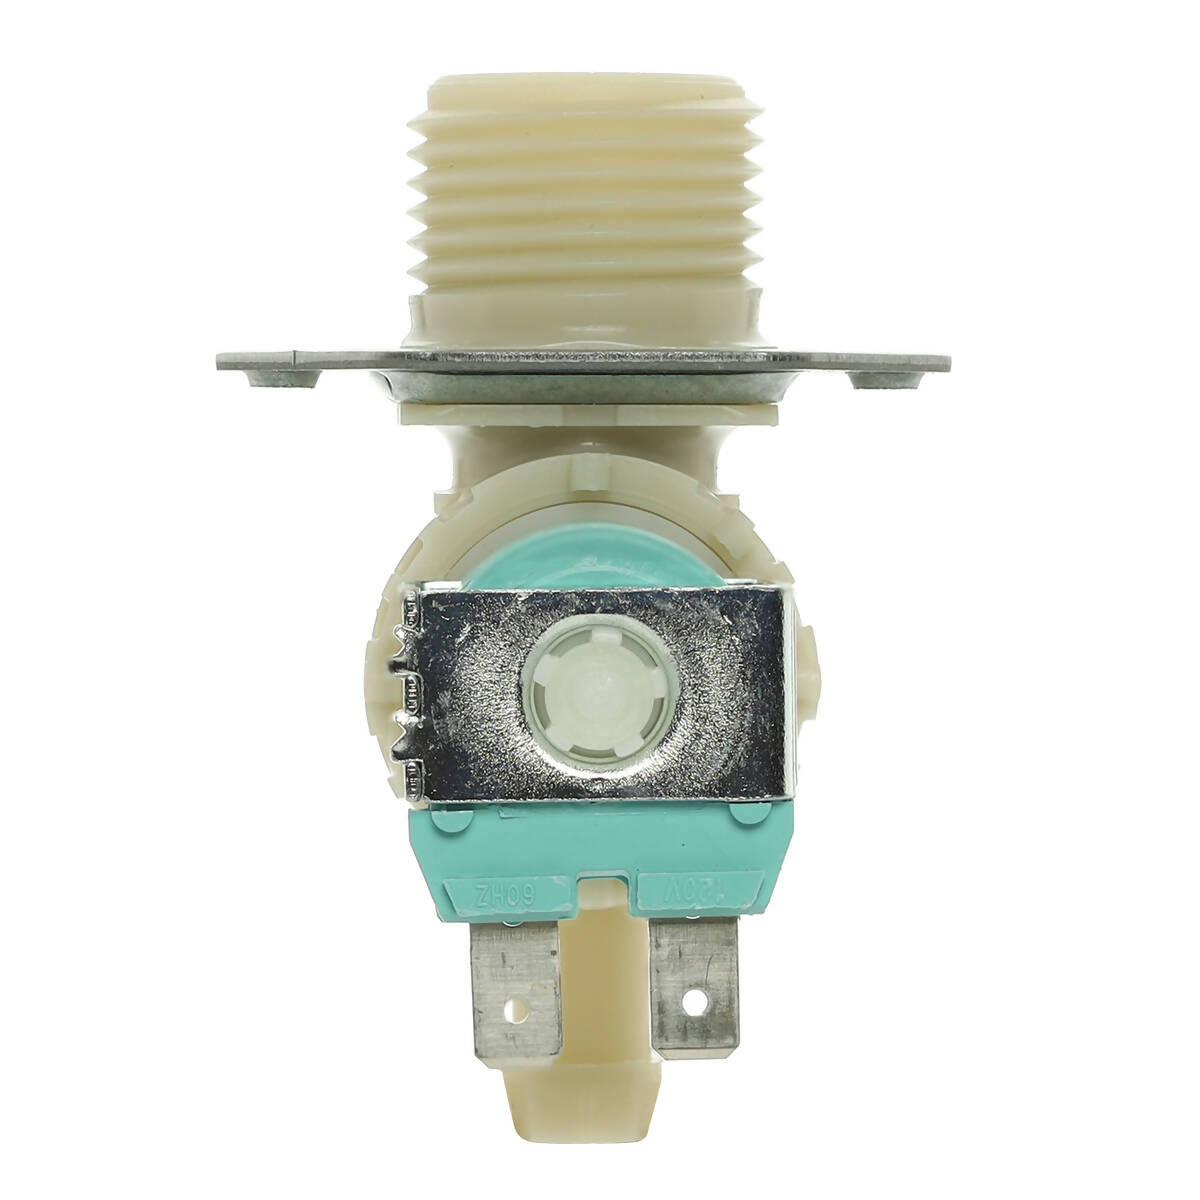 Samsung Washer Water Inlet Valve - DC62-30314K, Replaces: DC62-30314H 1810145 AP4204535 PS4209100 EAP4209100 PD00002095